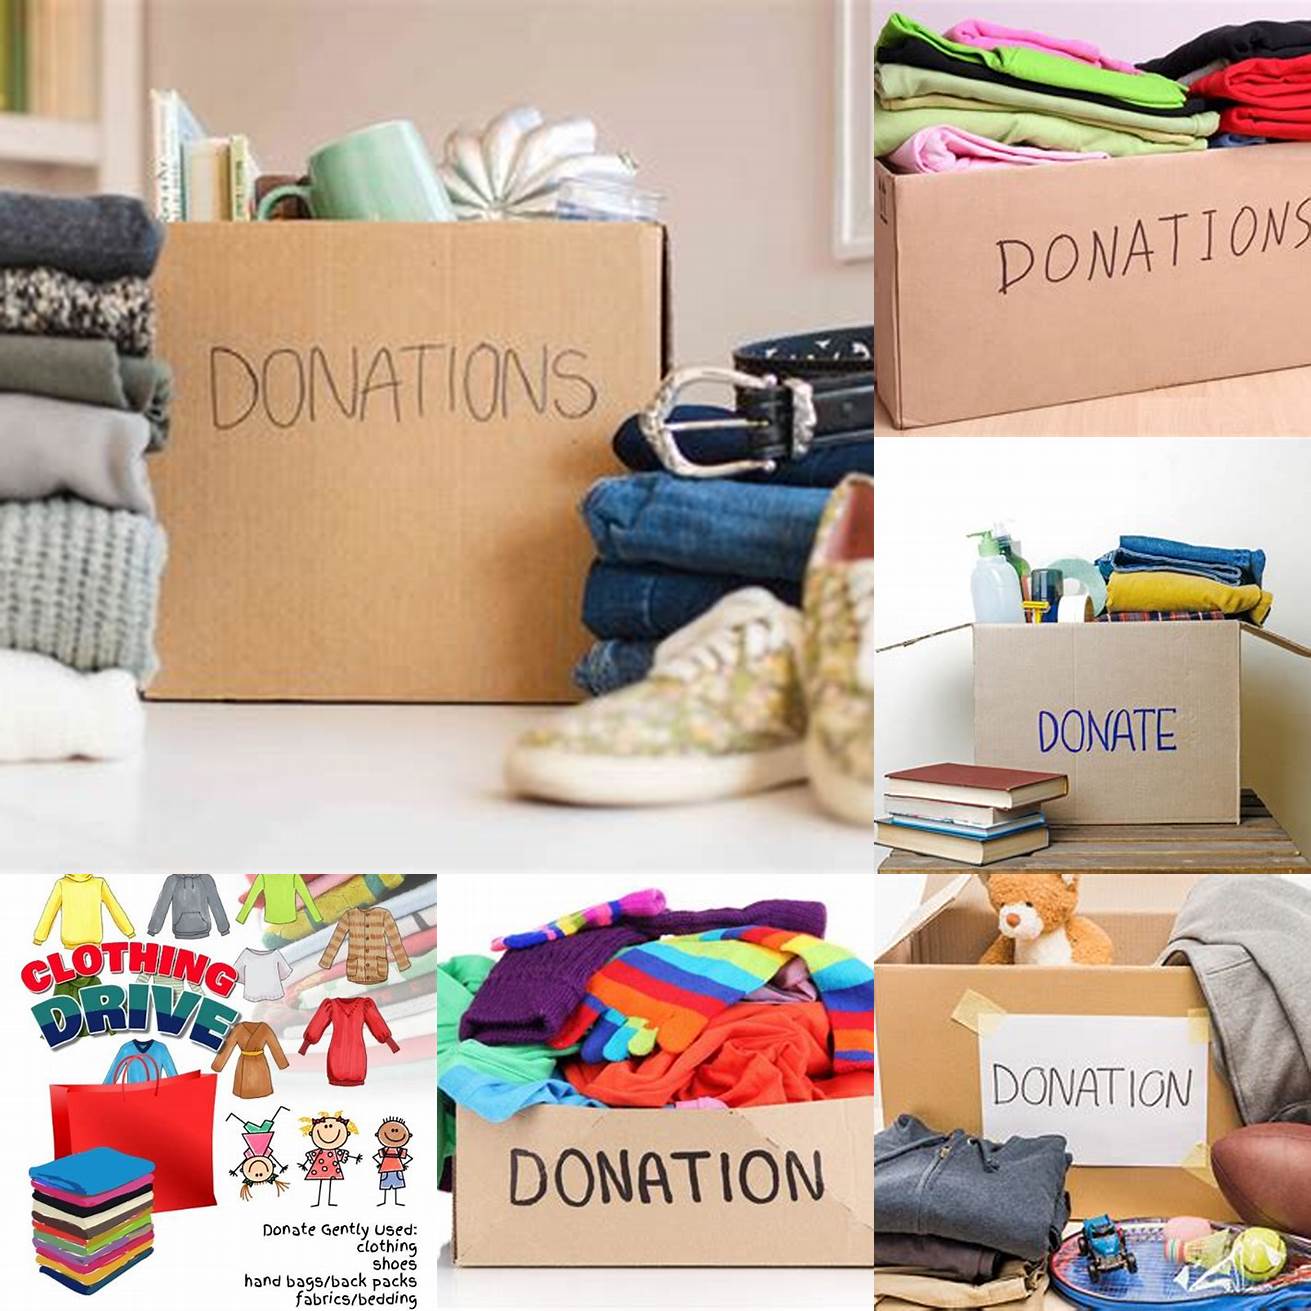 Sort your items Sort your clothes shoes and other items by category and decide which items to keep donate or throw away